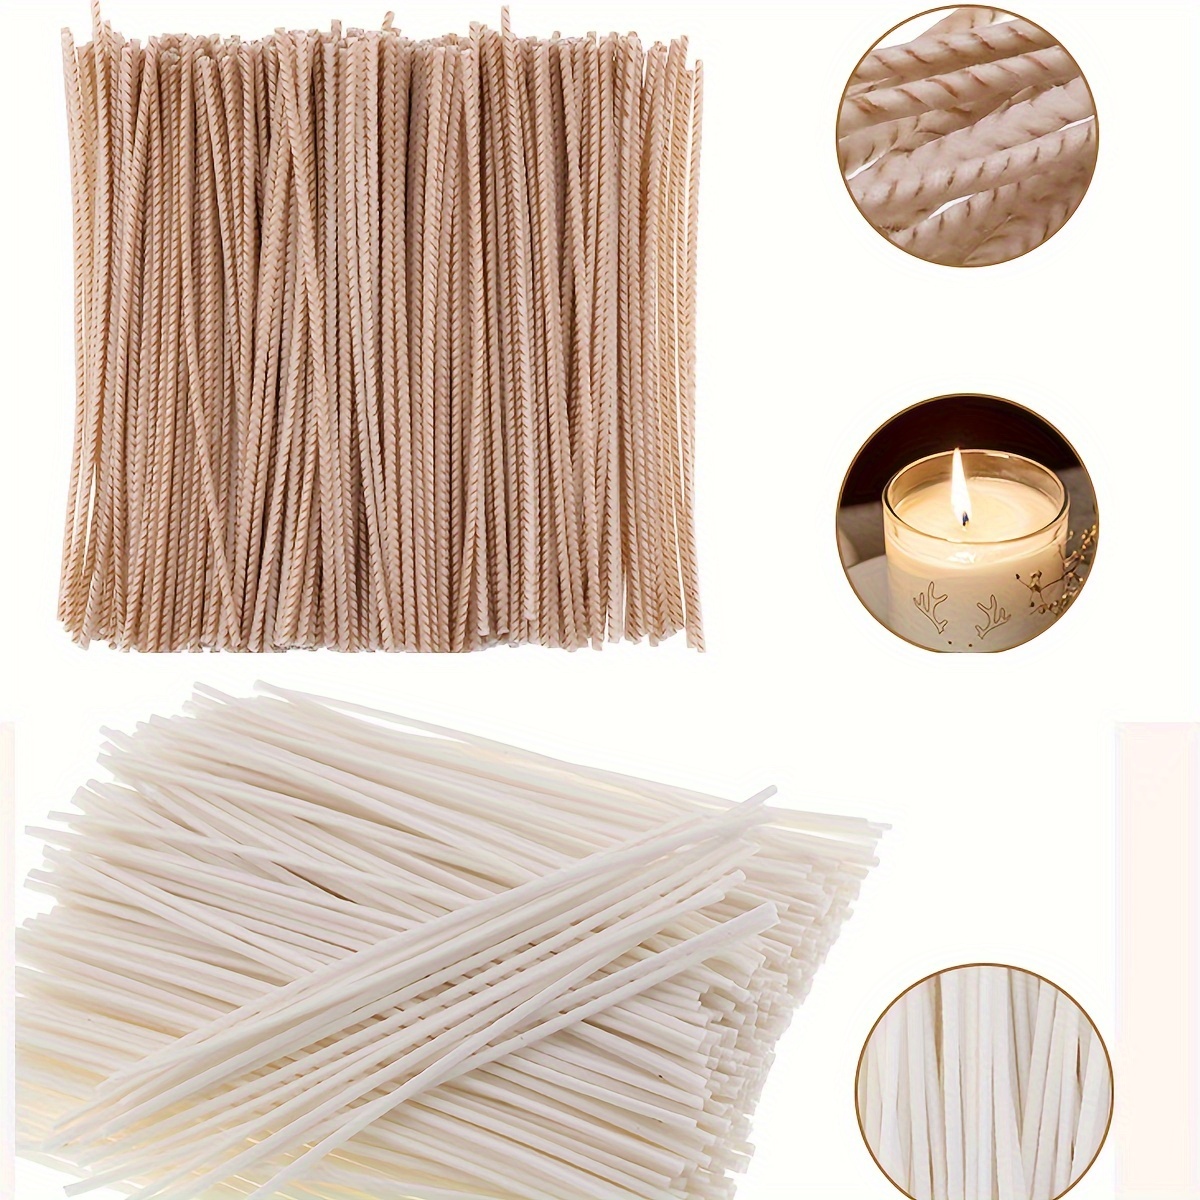  100 PCS 8 inch Hemp Candle Wicks kit, 2.5mm Beeswax Candle Wicks  for DIY Bulk Natural Candle Wicks for Beeswax Candle Making Hemp Edible  Candle Wick for Butter Candle